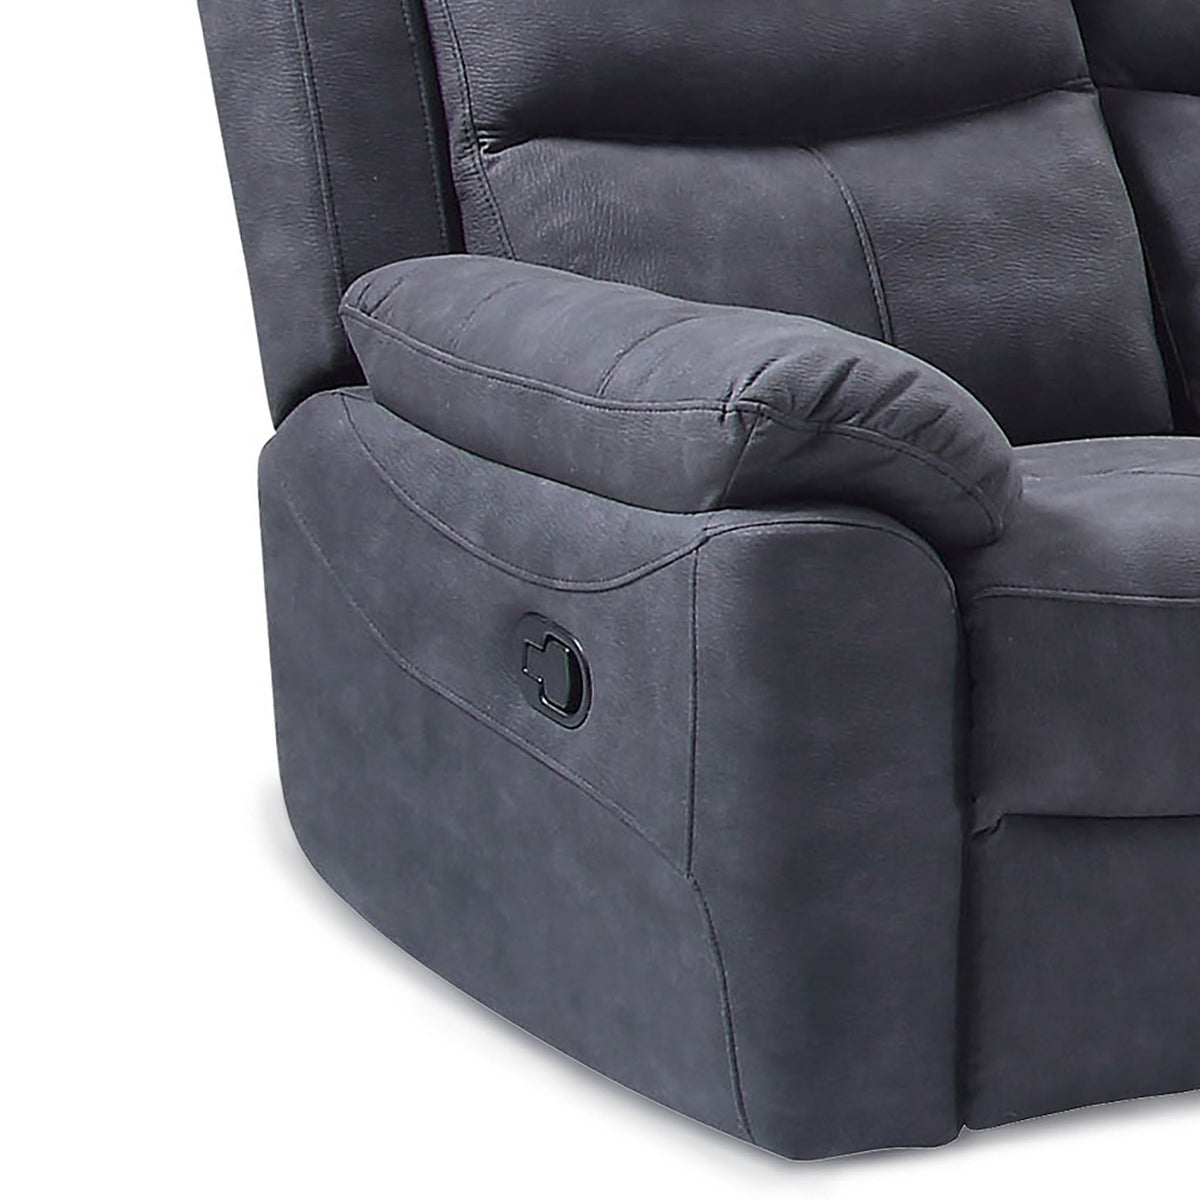 Conway Charcoal 3 Seater Recliner Sofa - Close up of side of sofa